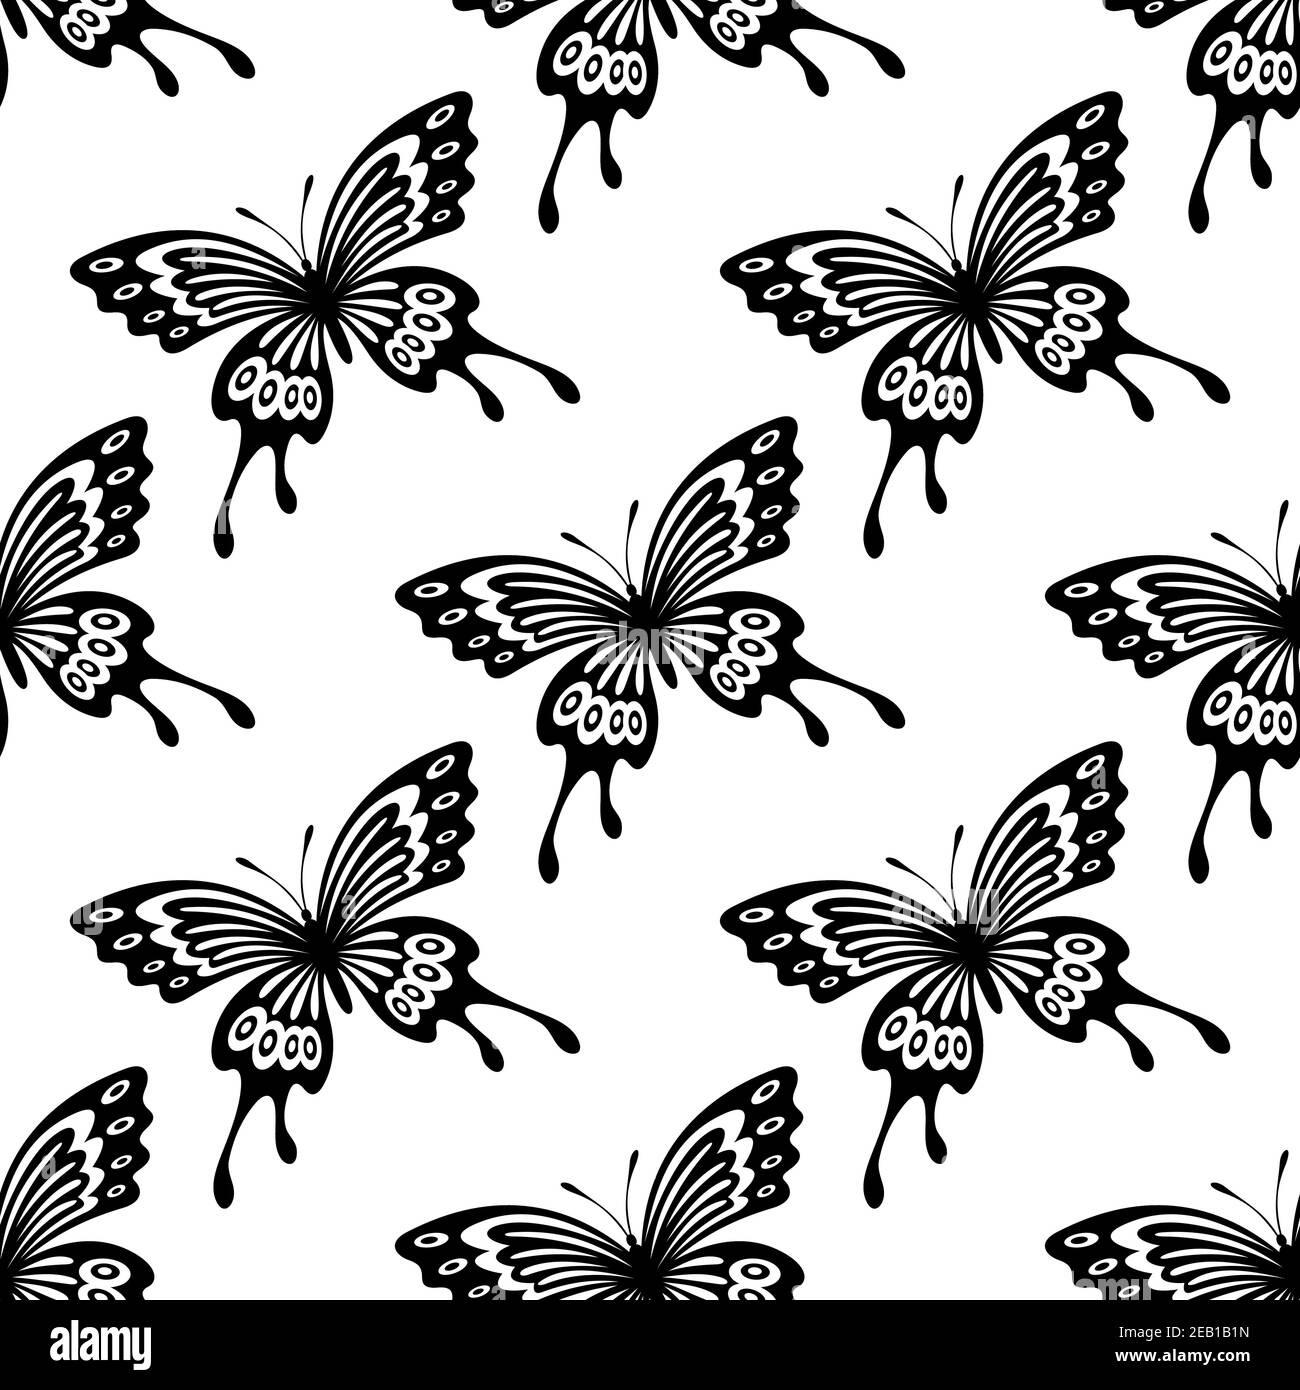 Realistic Blue And White Butterflies Seamless Pattern On Black Background  Royalty Free SVG Cliparts Vectors And Stock Illustration Image  137940794